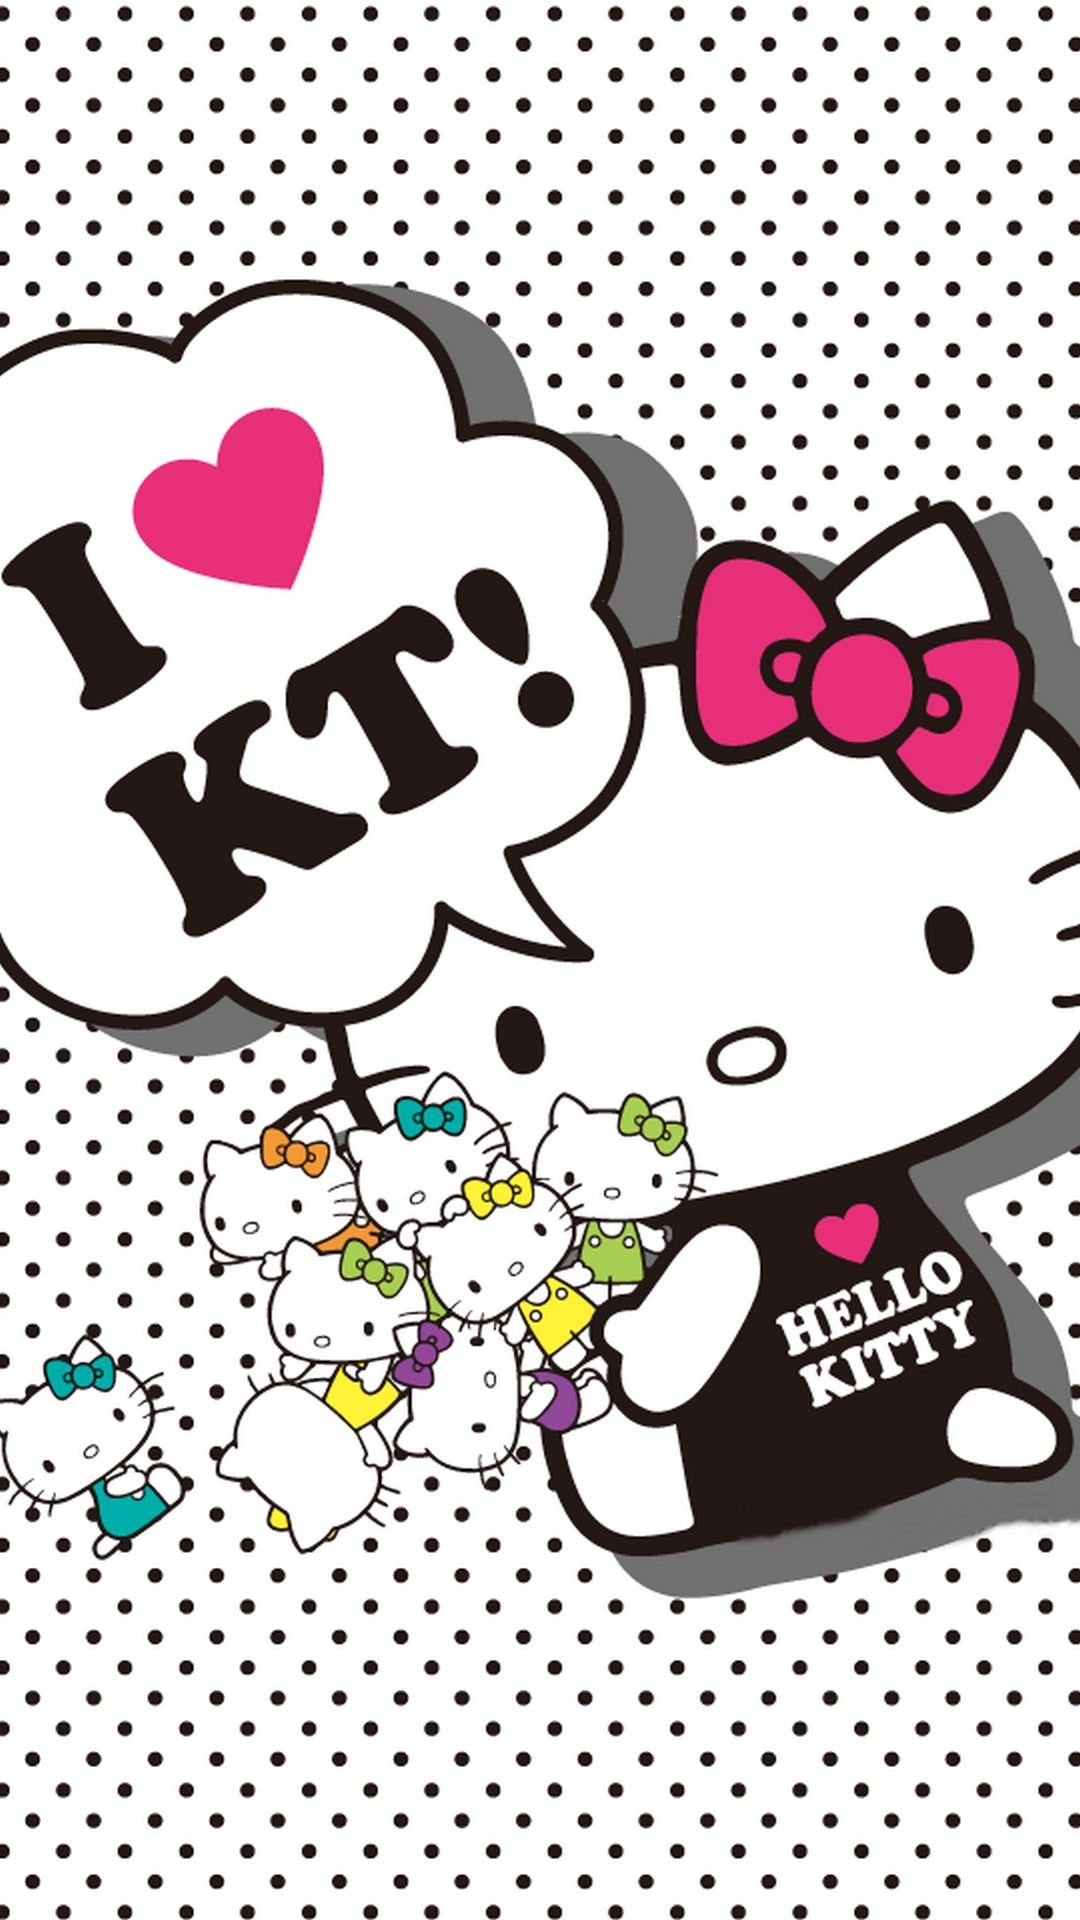 Hello Kitty HD Wallpaper For Mobile With Image Resolution Kitty Kt